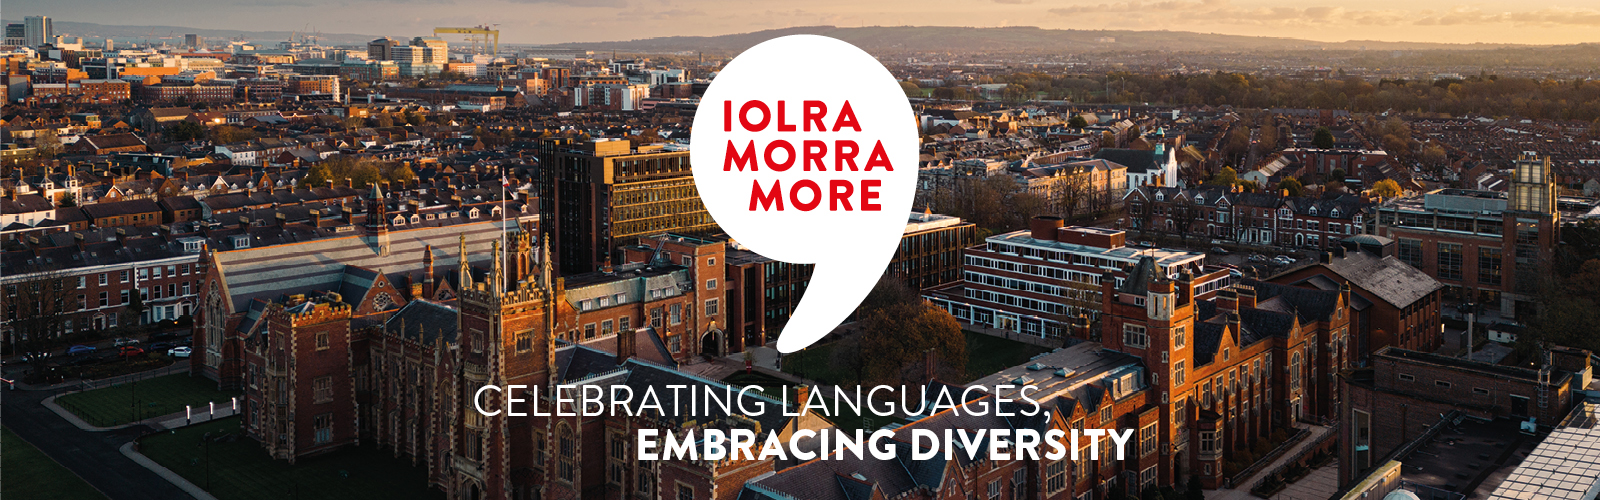 Image shows a cityscape of Belfast with a speech bubble that reads: Iolra Morra More. Text underneath the speech bubble reads: Celebrating Languages, Embracing Diversity